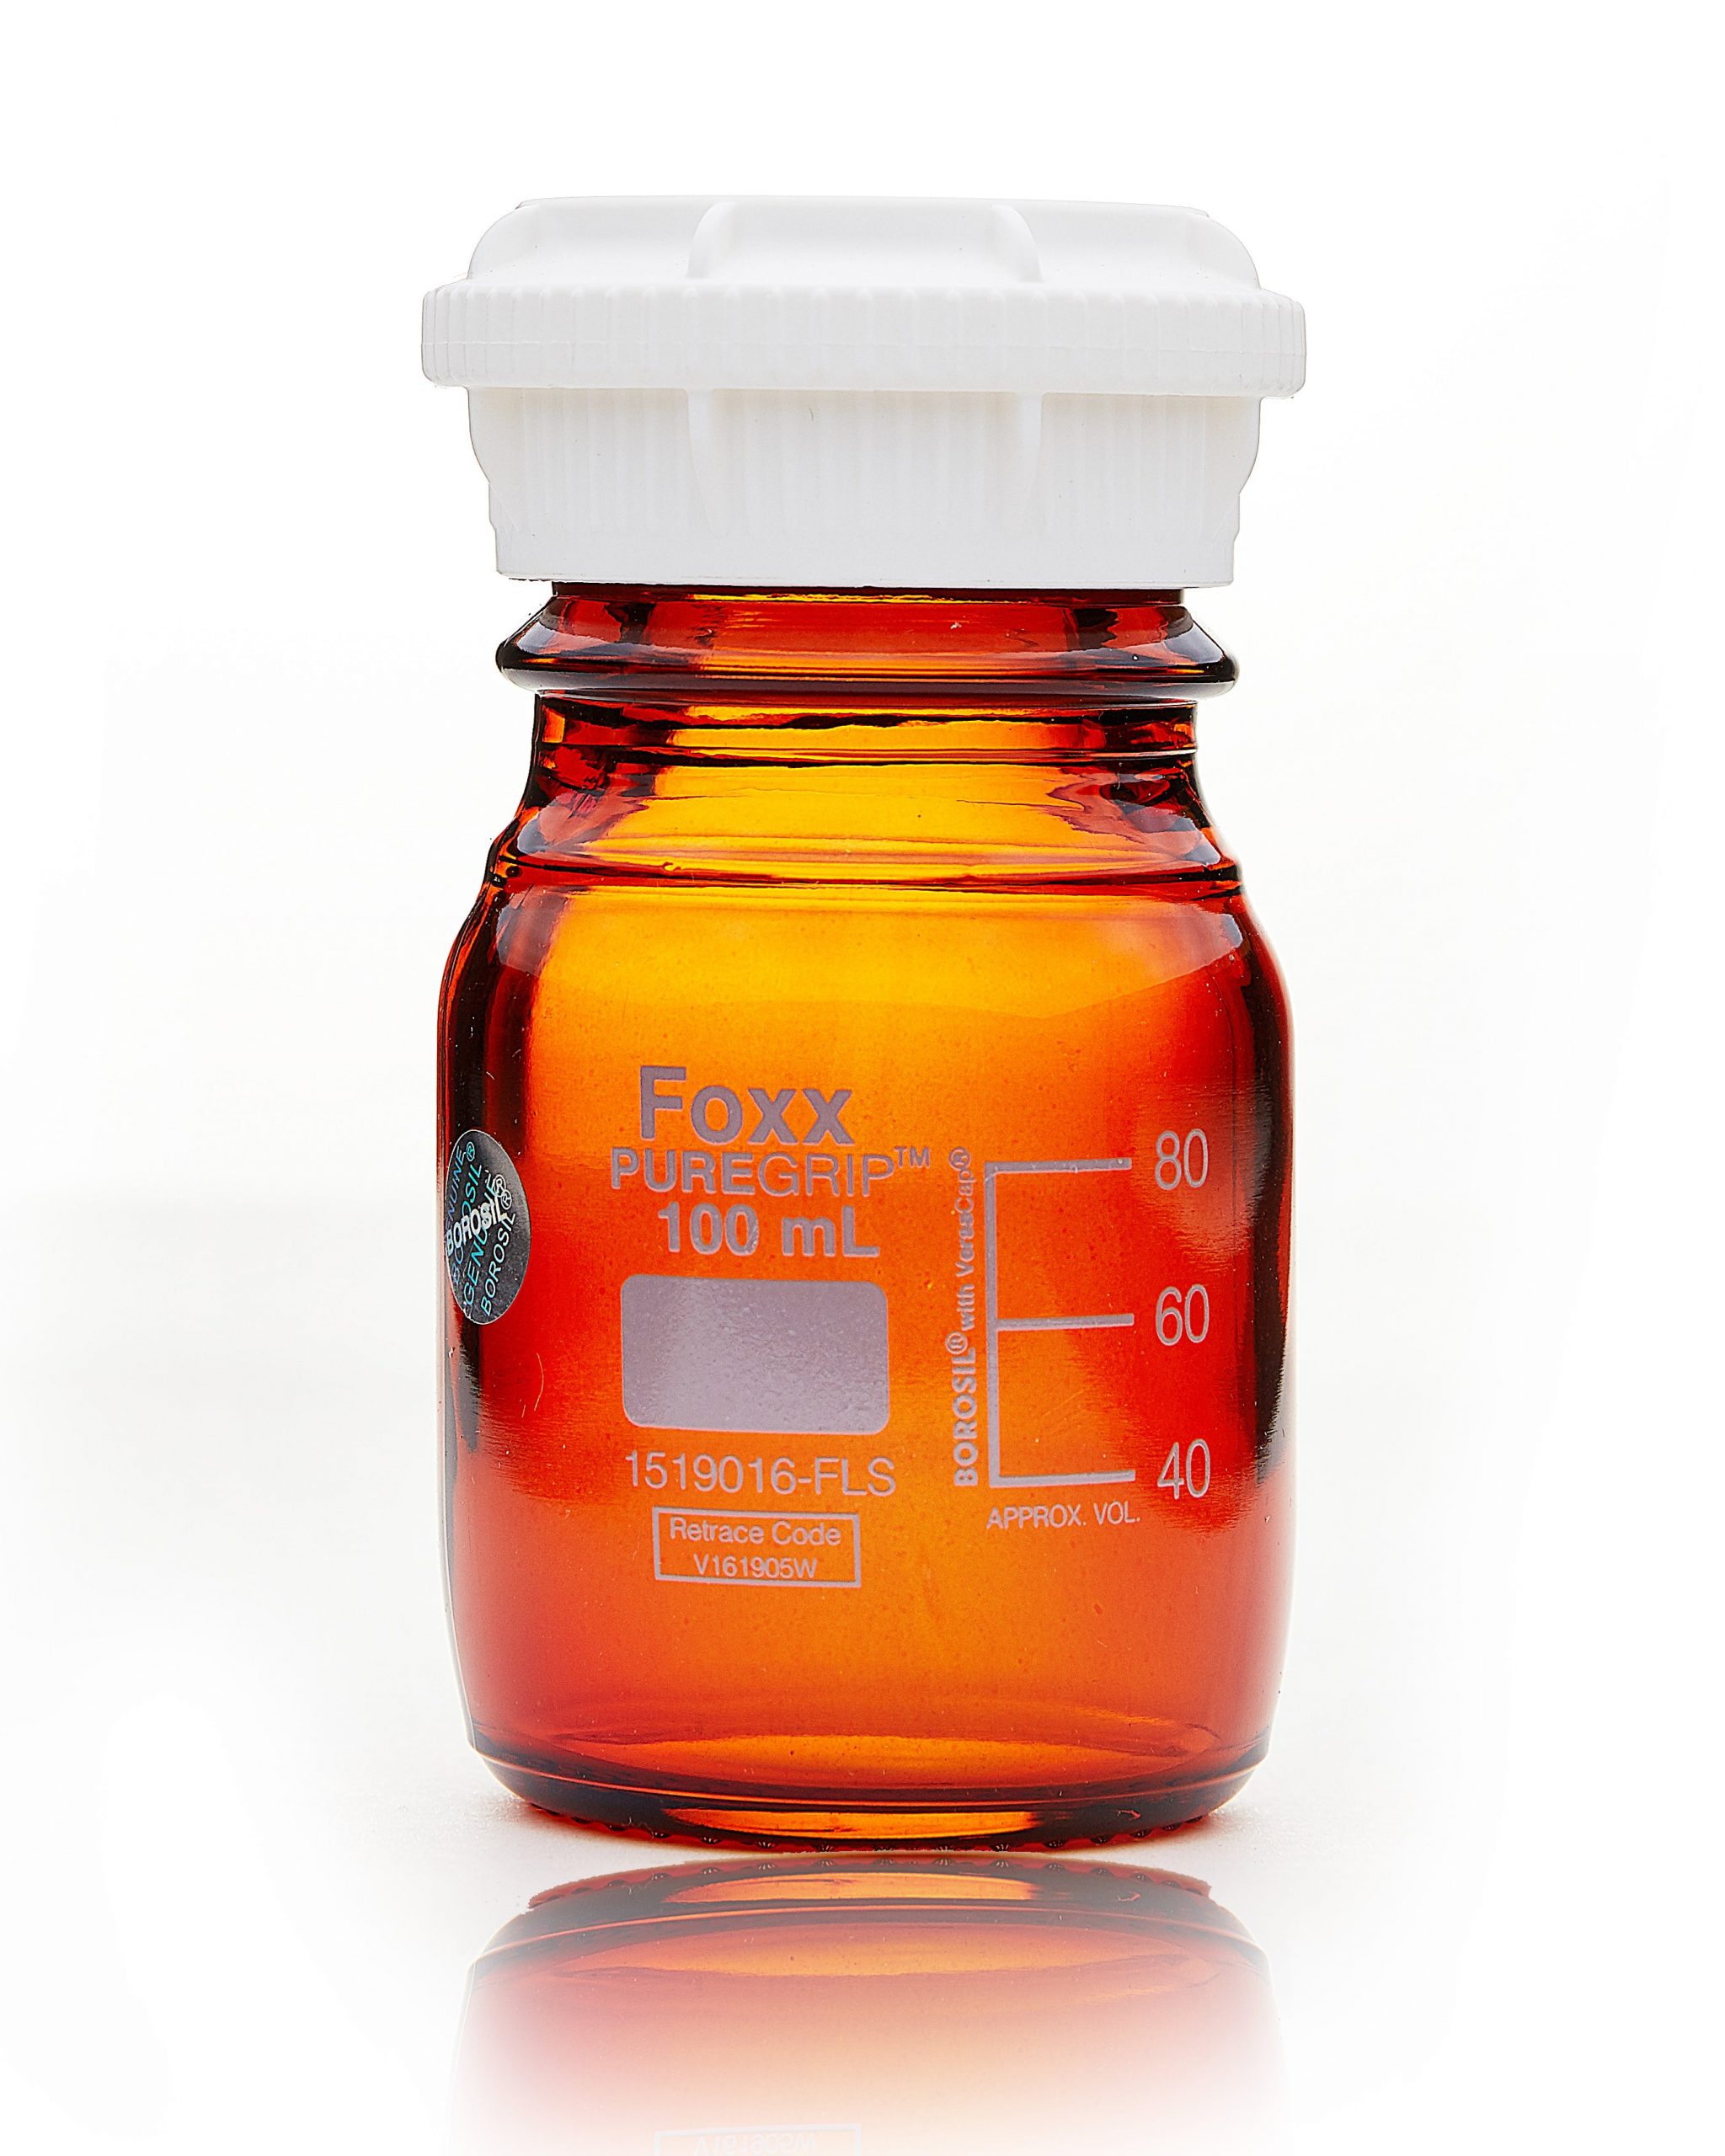 Amber glass jar 100 ml  Buy online now at